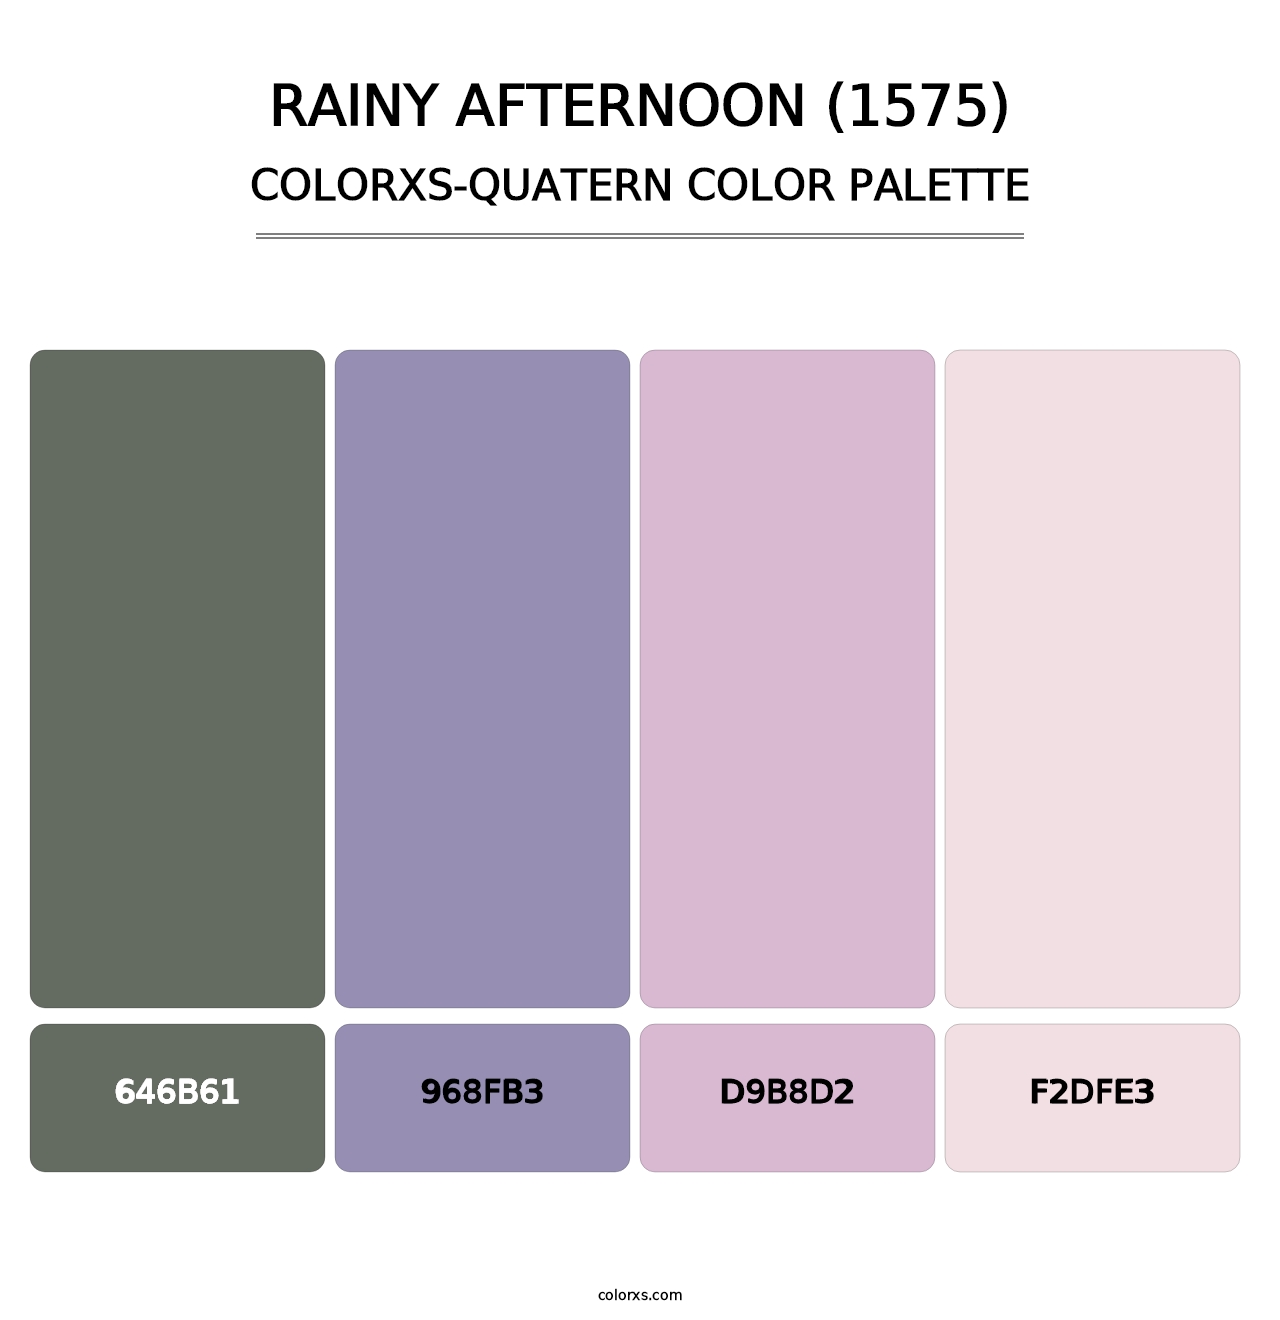 Rainy Afternoon (1575) - Colorxs Quatern Palette